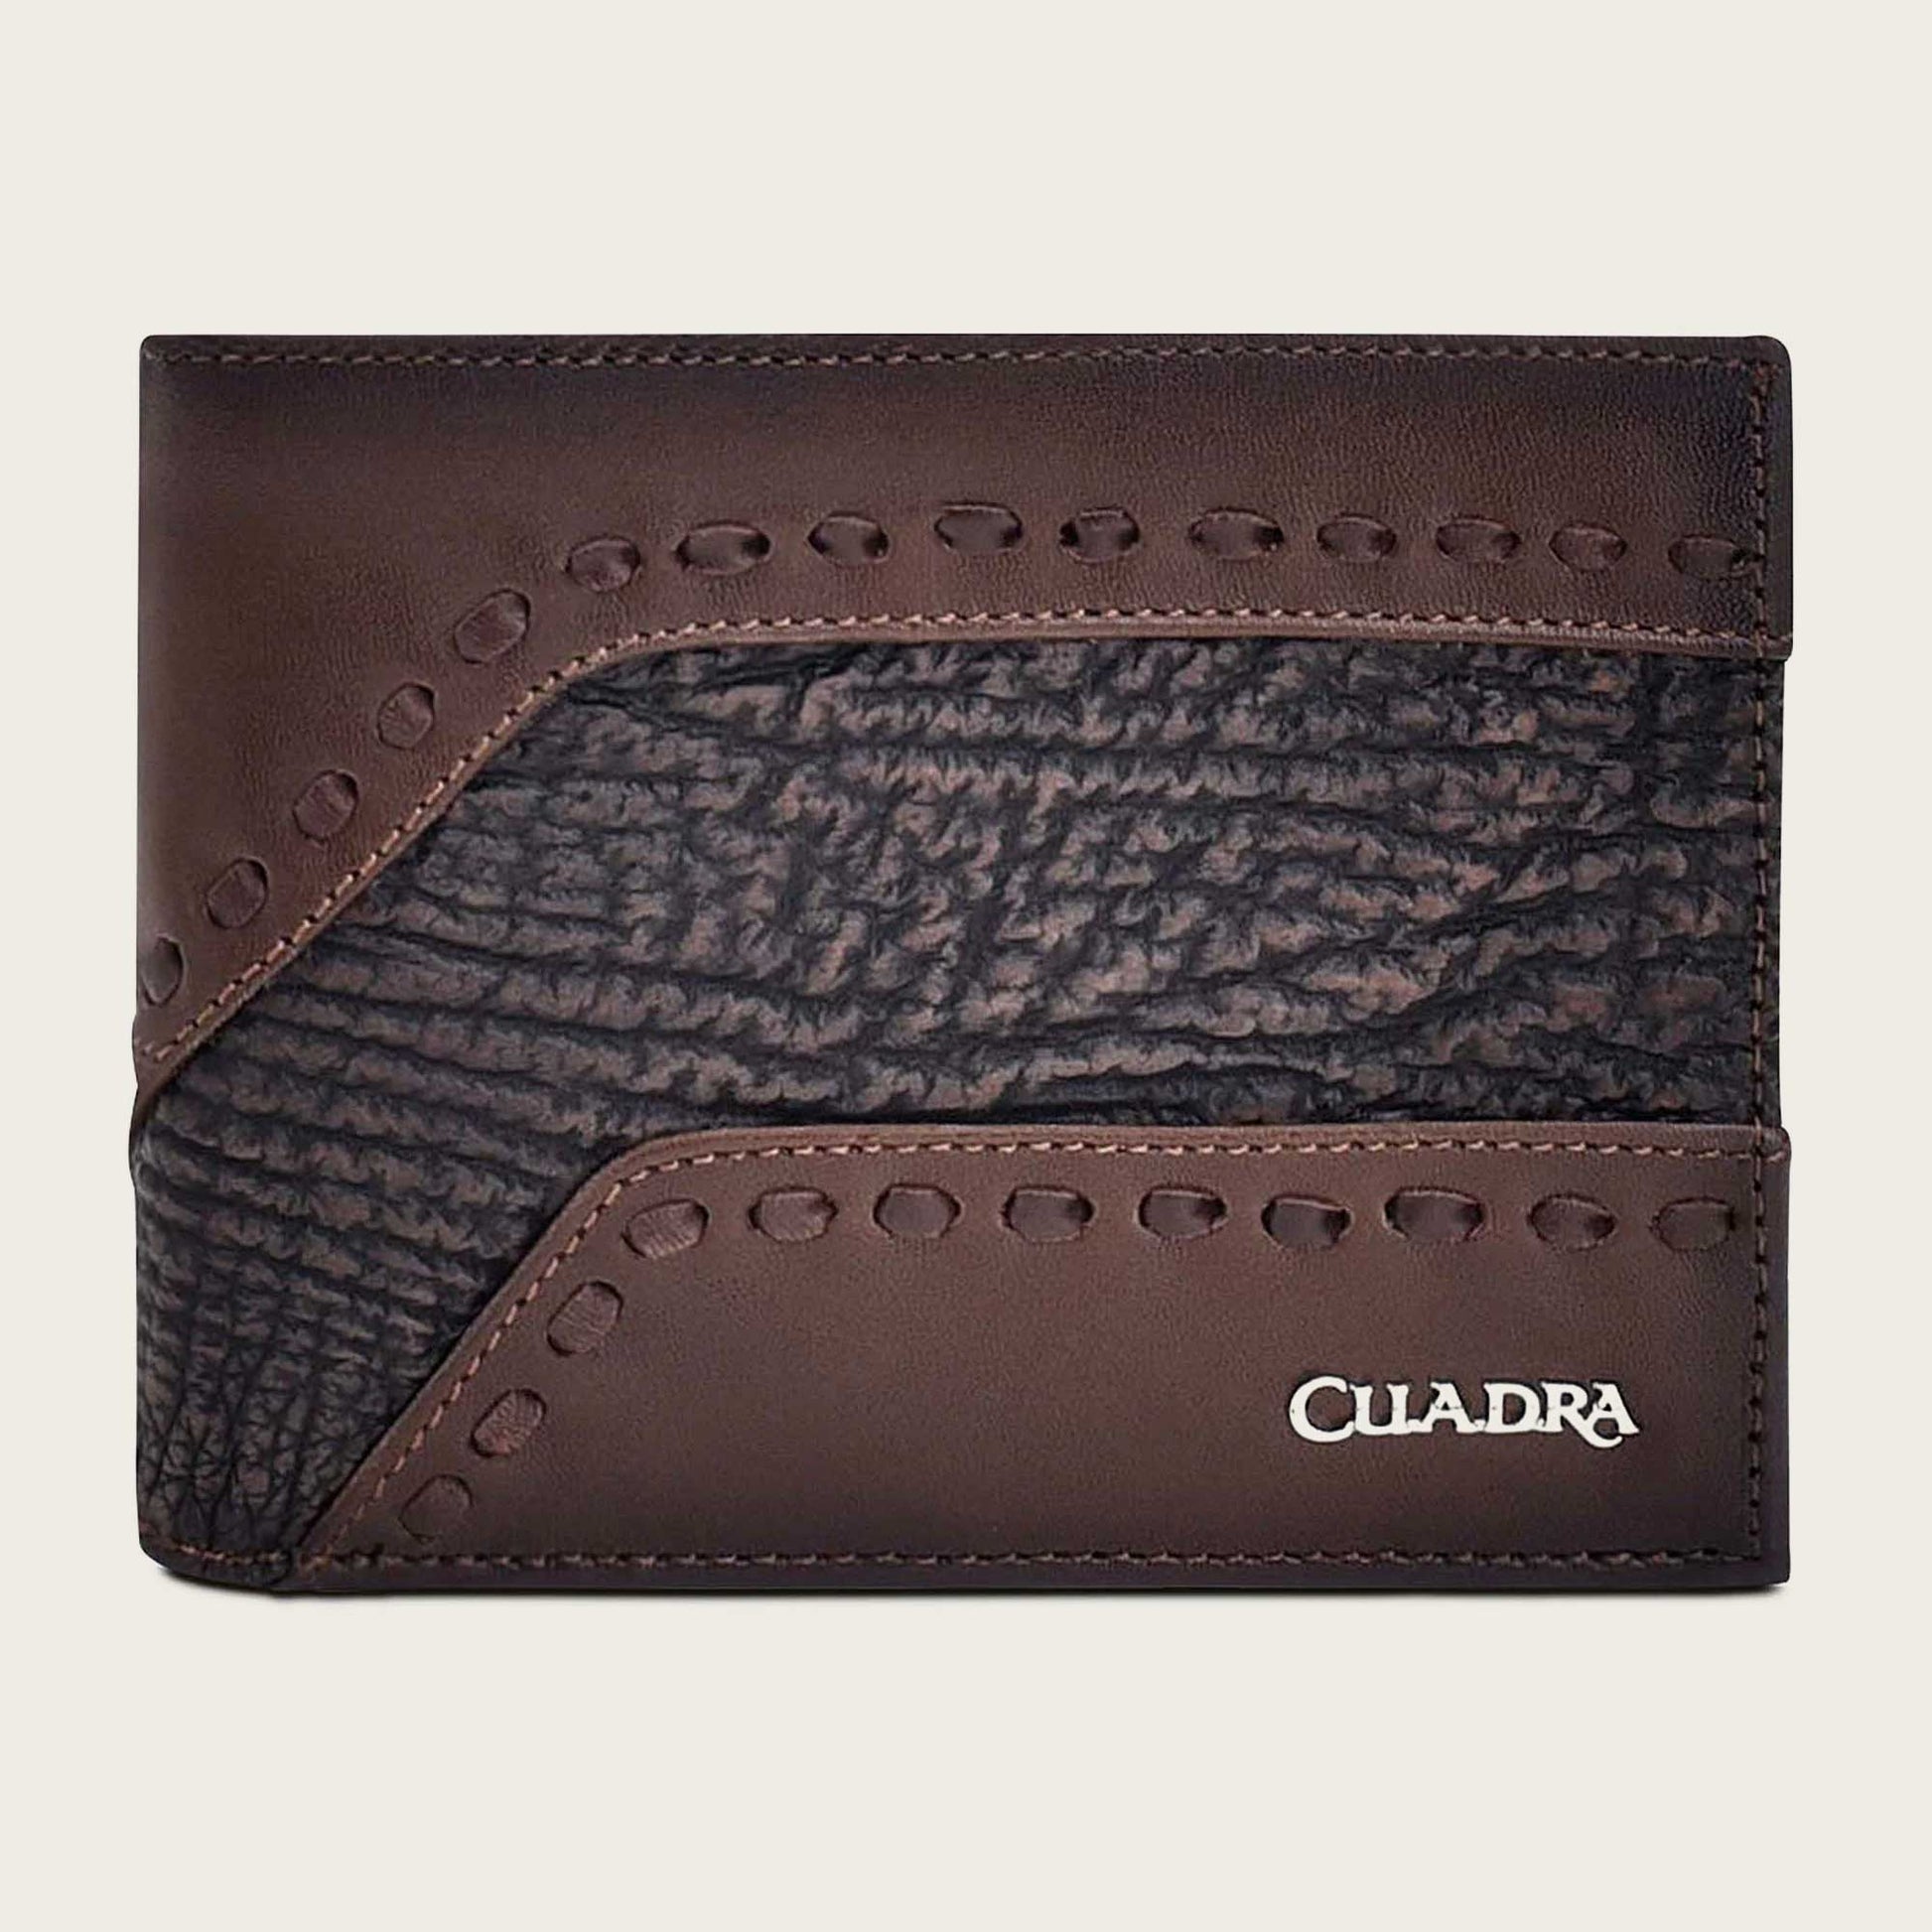 Contrasting leather strap brown leather wallet - 4597 - Cuadra Shop